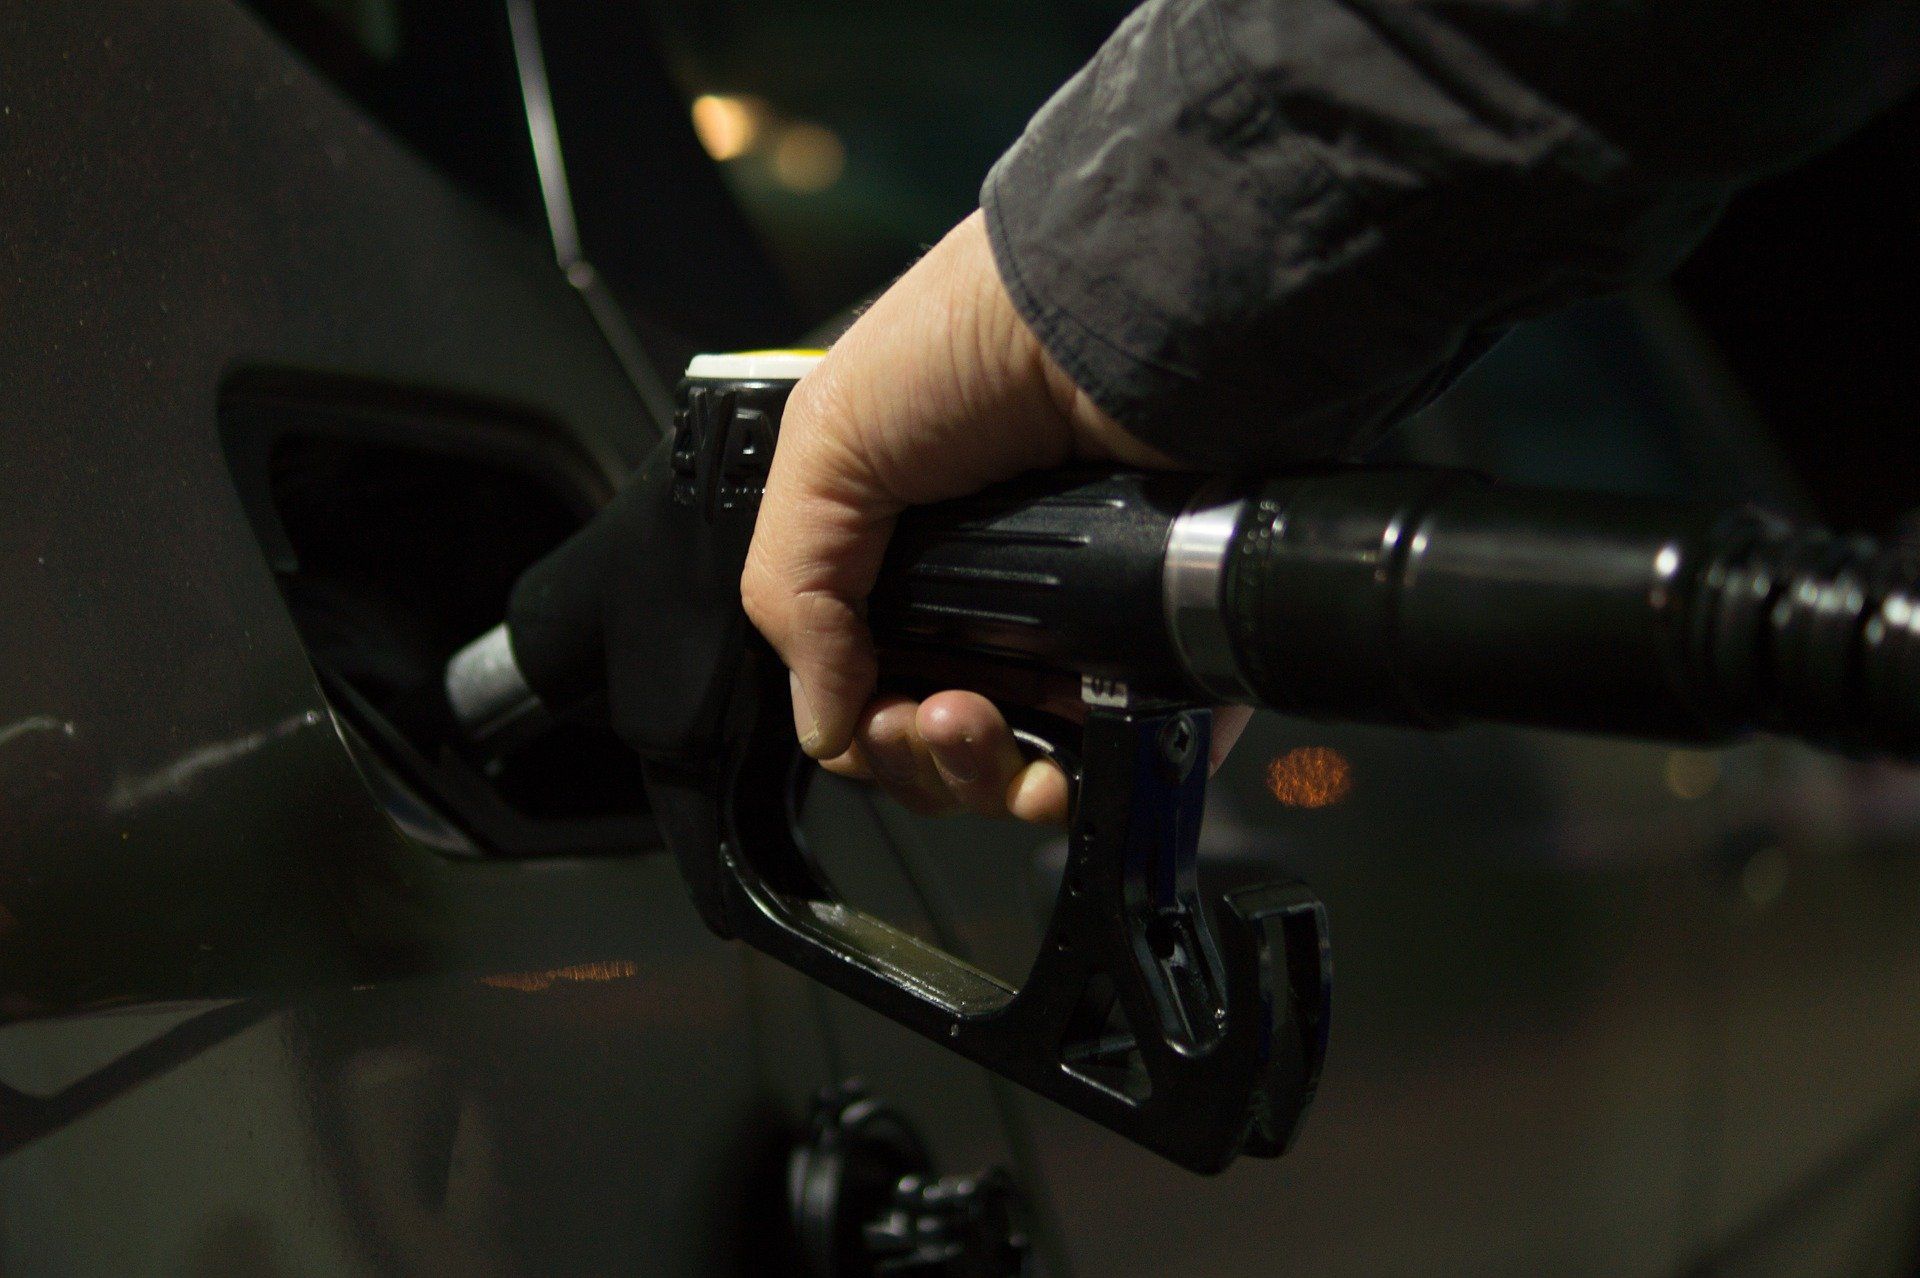 Fuel price today: Petrol and Diesel rates remain unchanged on April 20, 2022